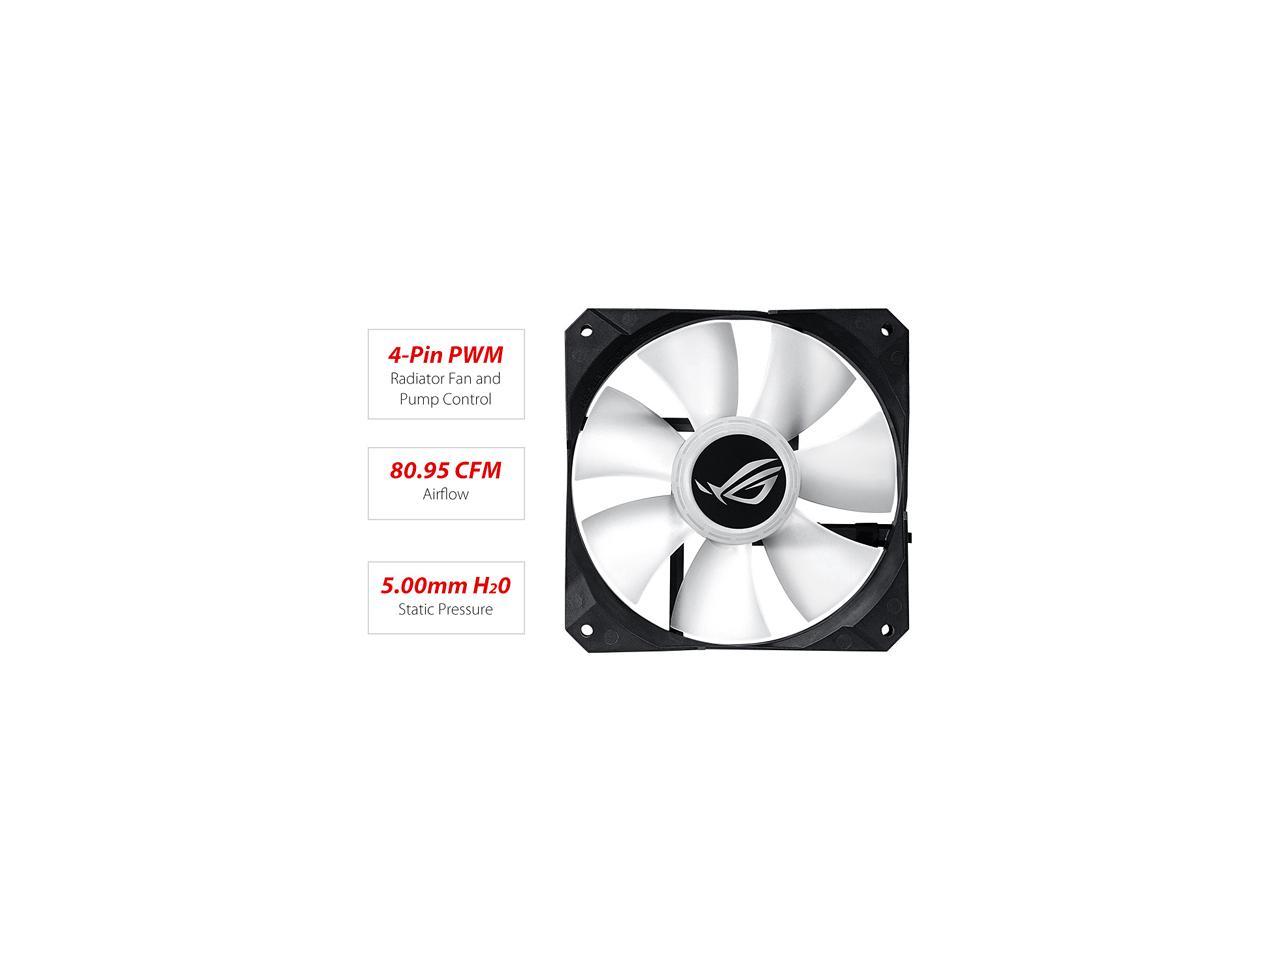 Asus Rog Strix Lc 360 Rgb All-In-One Liquid Cpu Cooler 360Mm Radiator, Intel 115X/2066 And Amd